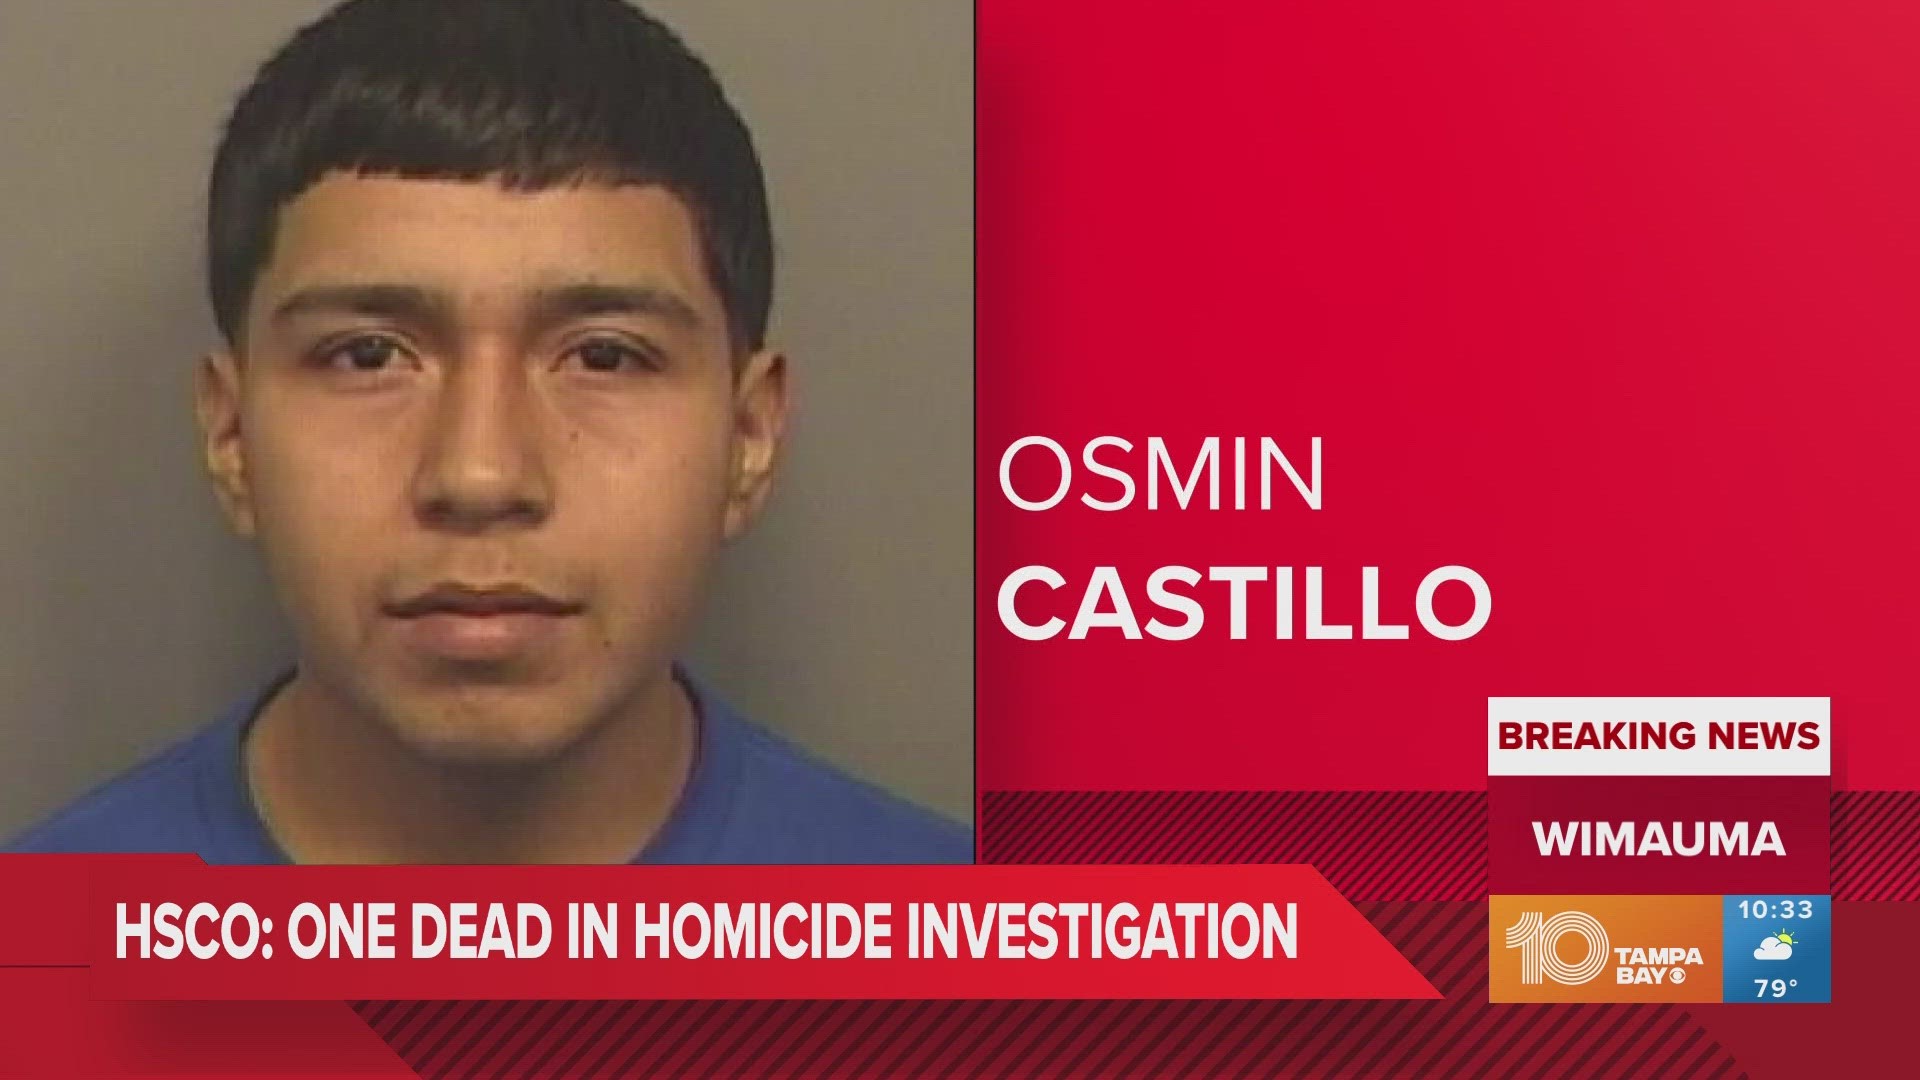 Detectives are currently working to locate Osmin Castillo, 21, for his involvement in this case.